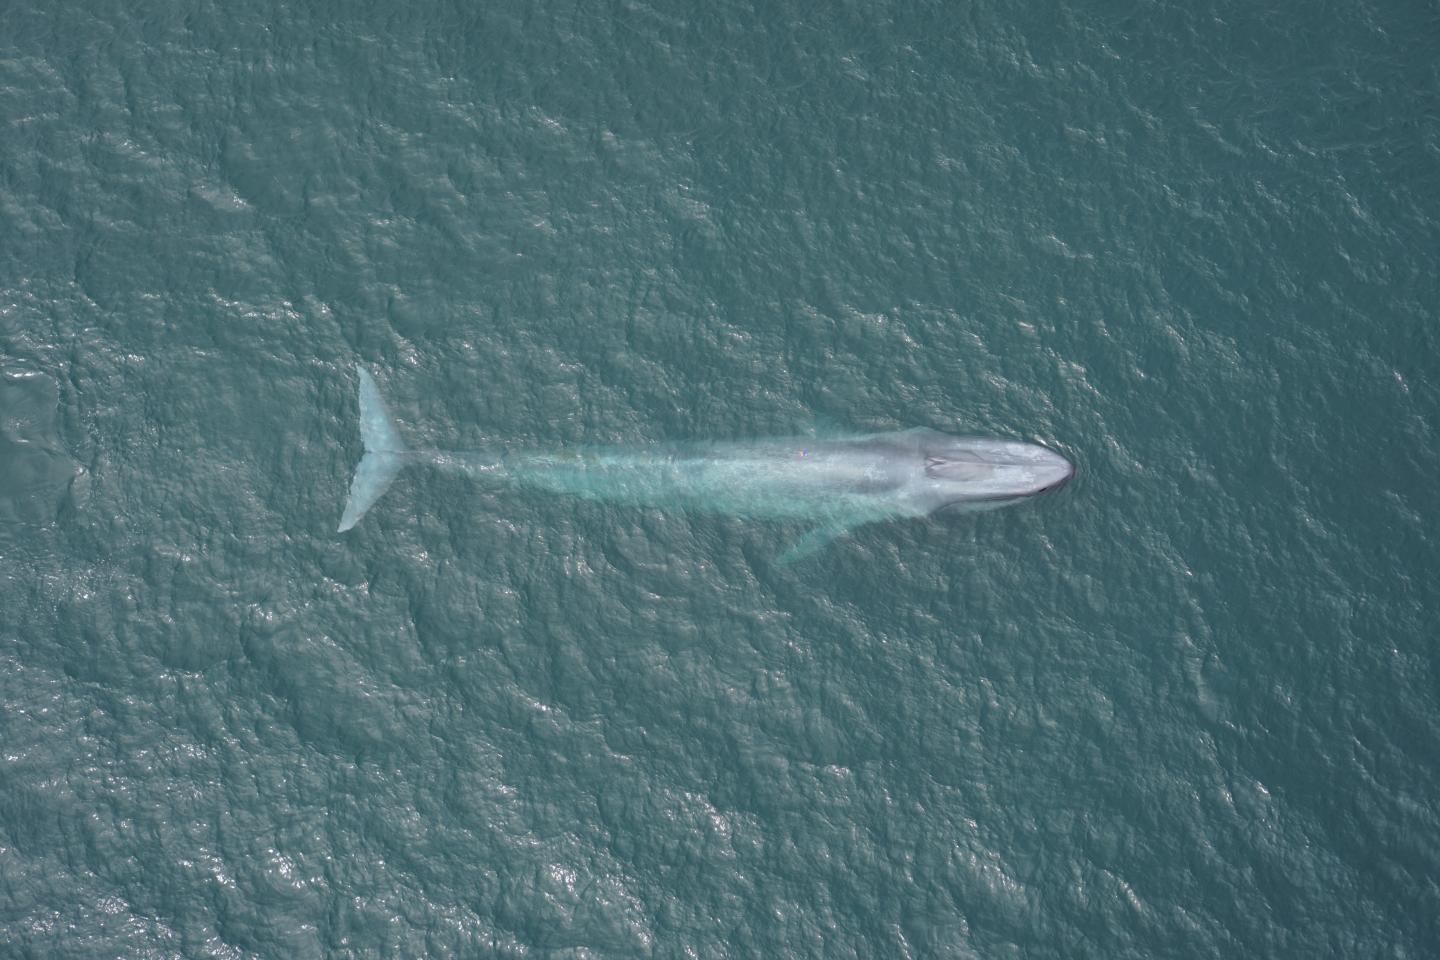 A Tagged Blue Whale Surfaces off the Coast of California in Monterey Bay